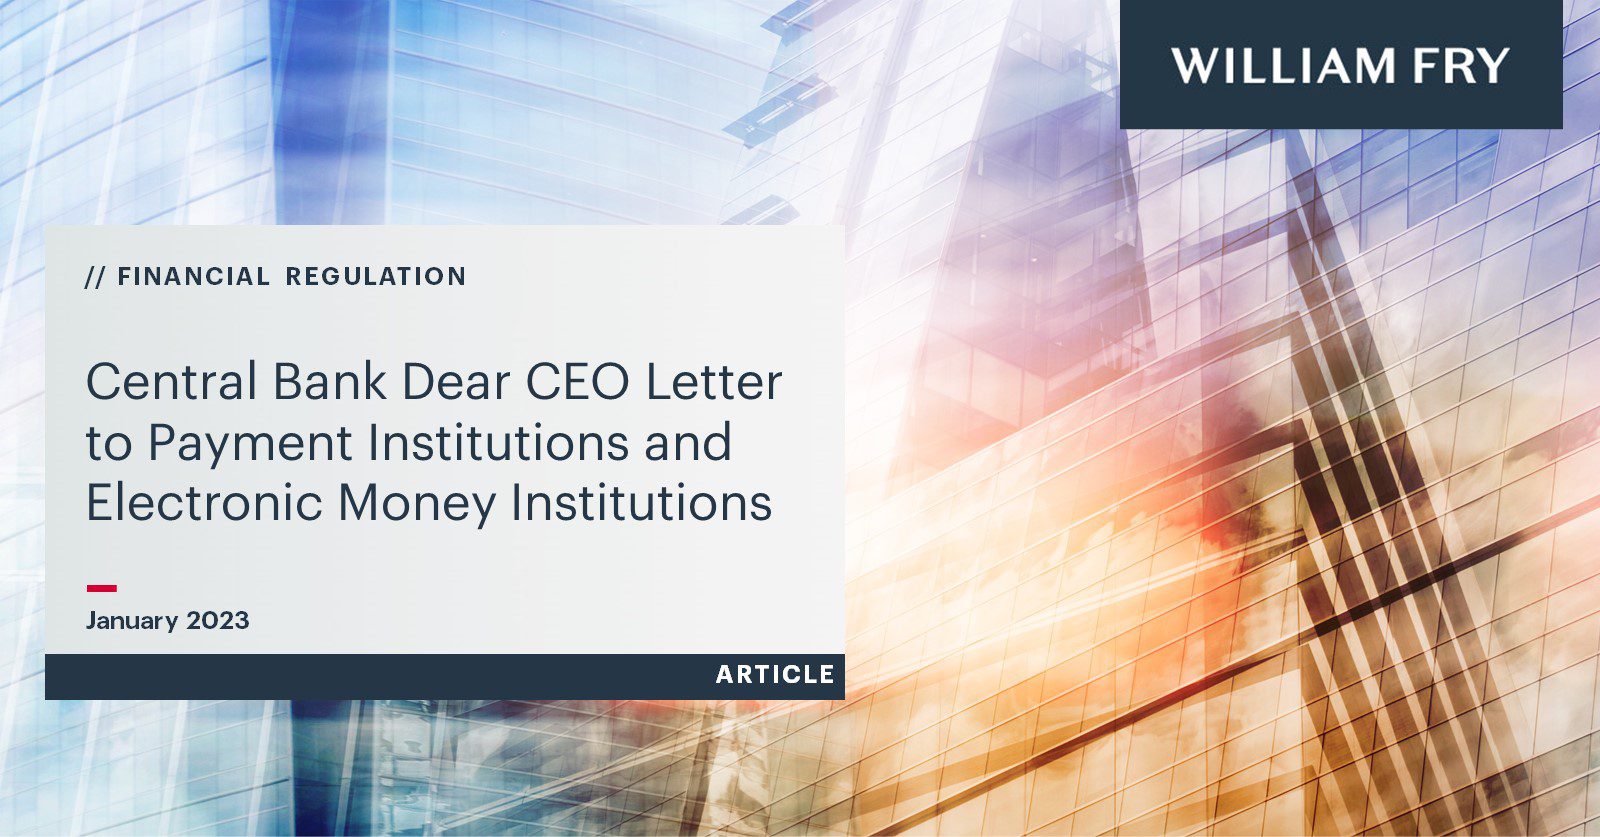 Central Bank Dear CEO Letter to Payment Institutions and Electronic Money Institutions (January 2023)